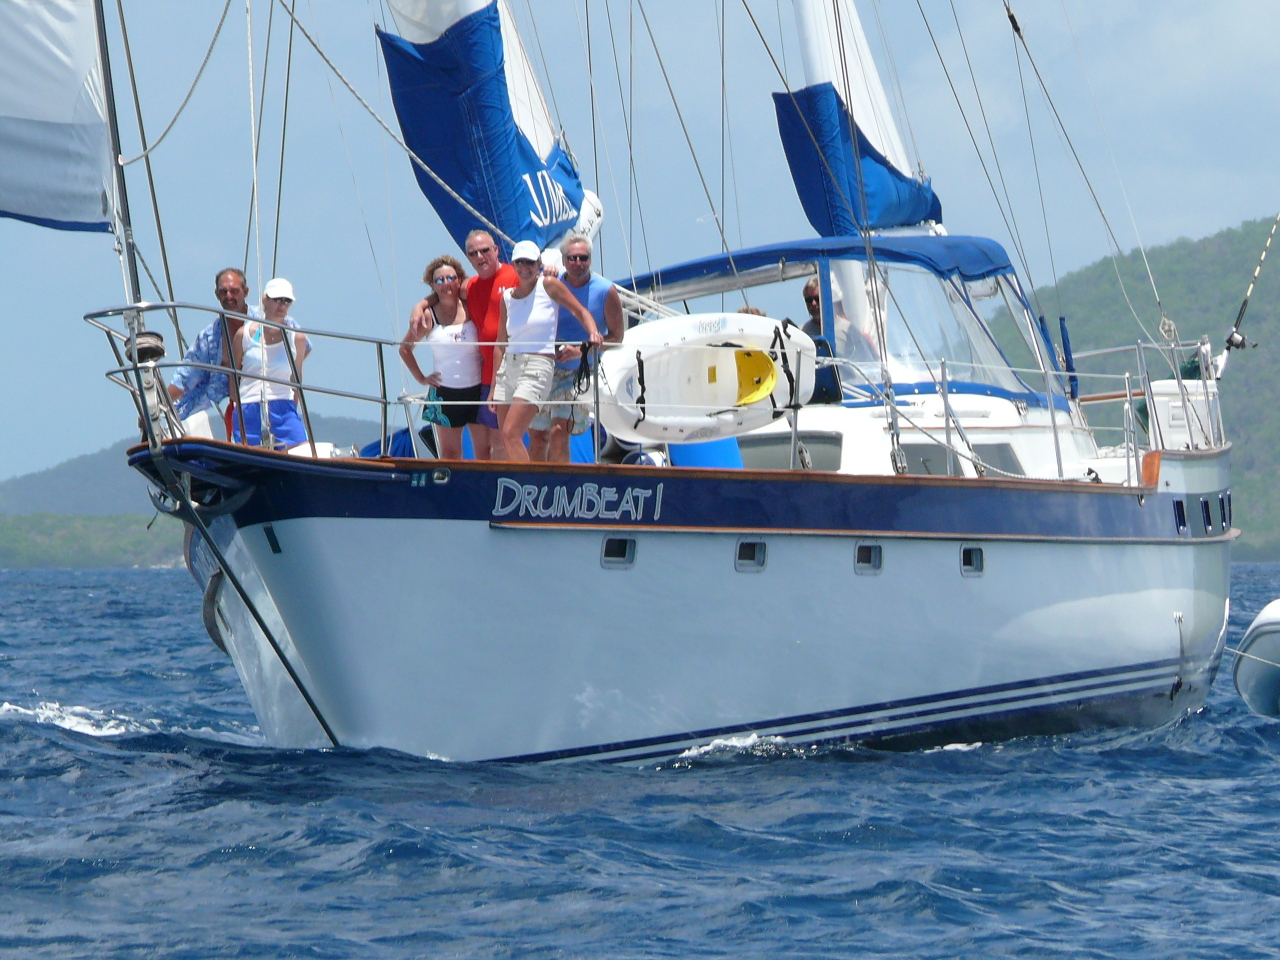 Sailboat Charter Drumbeat 1: In the BVI!